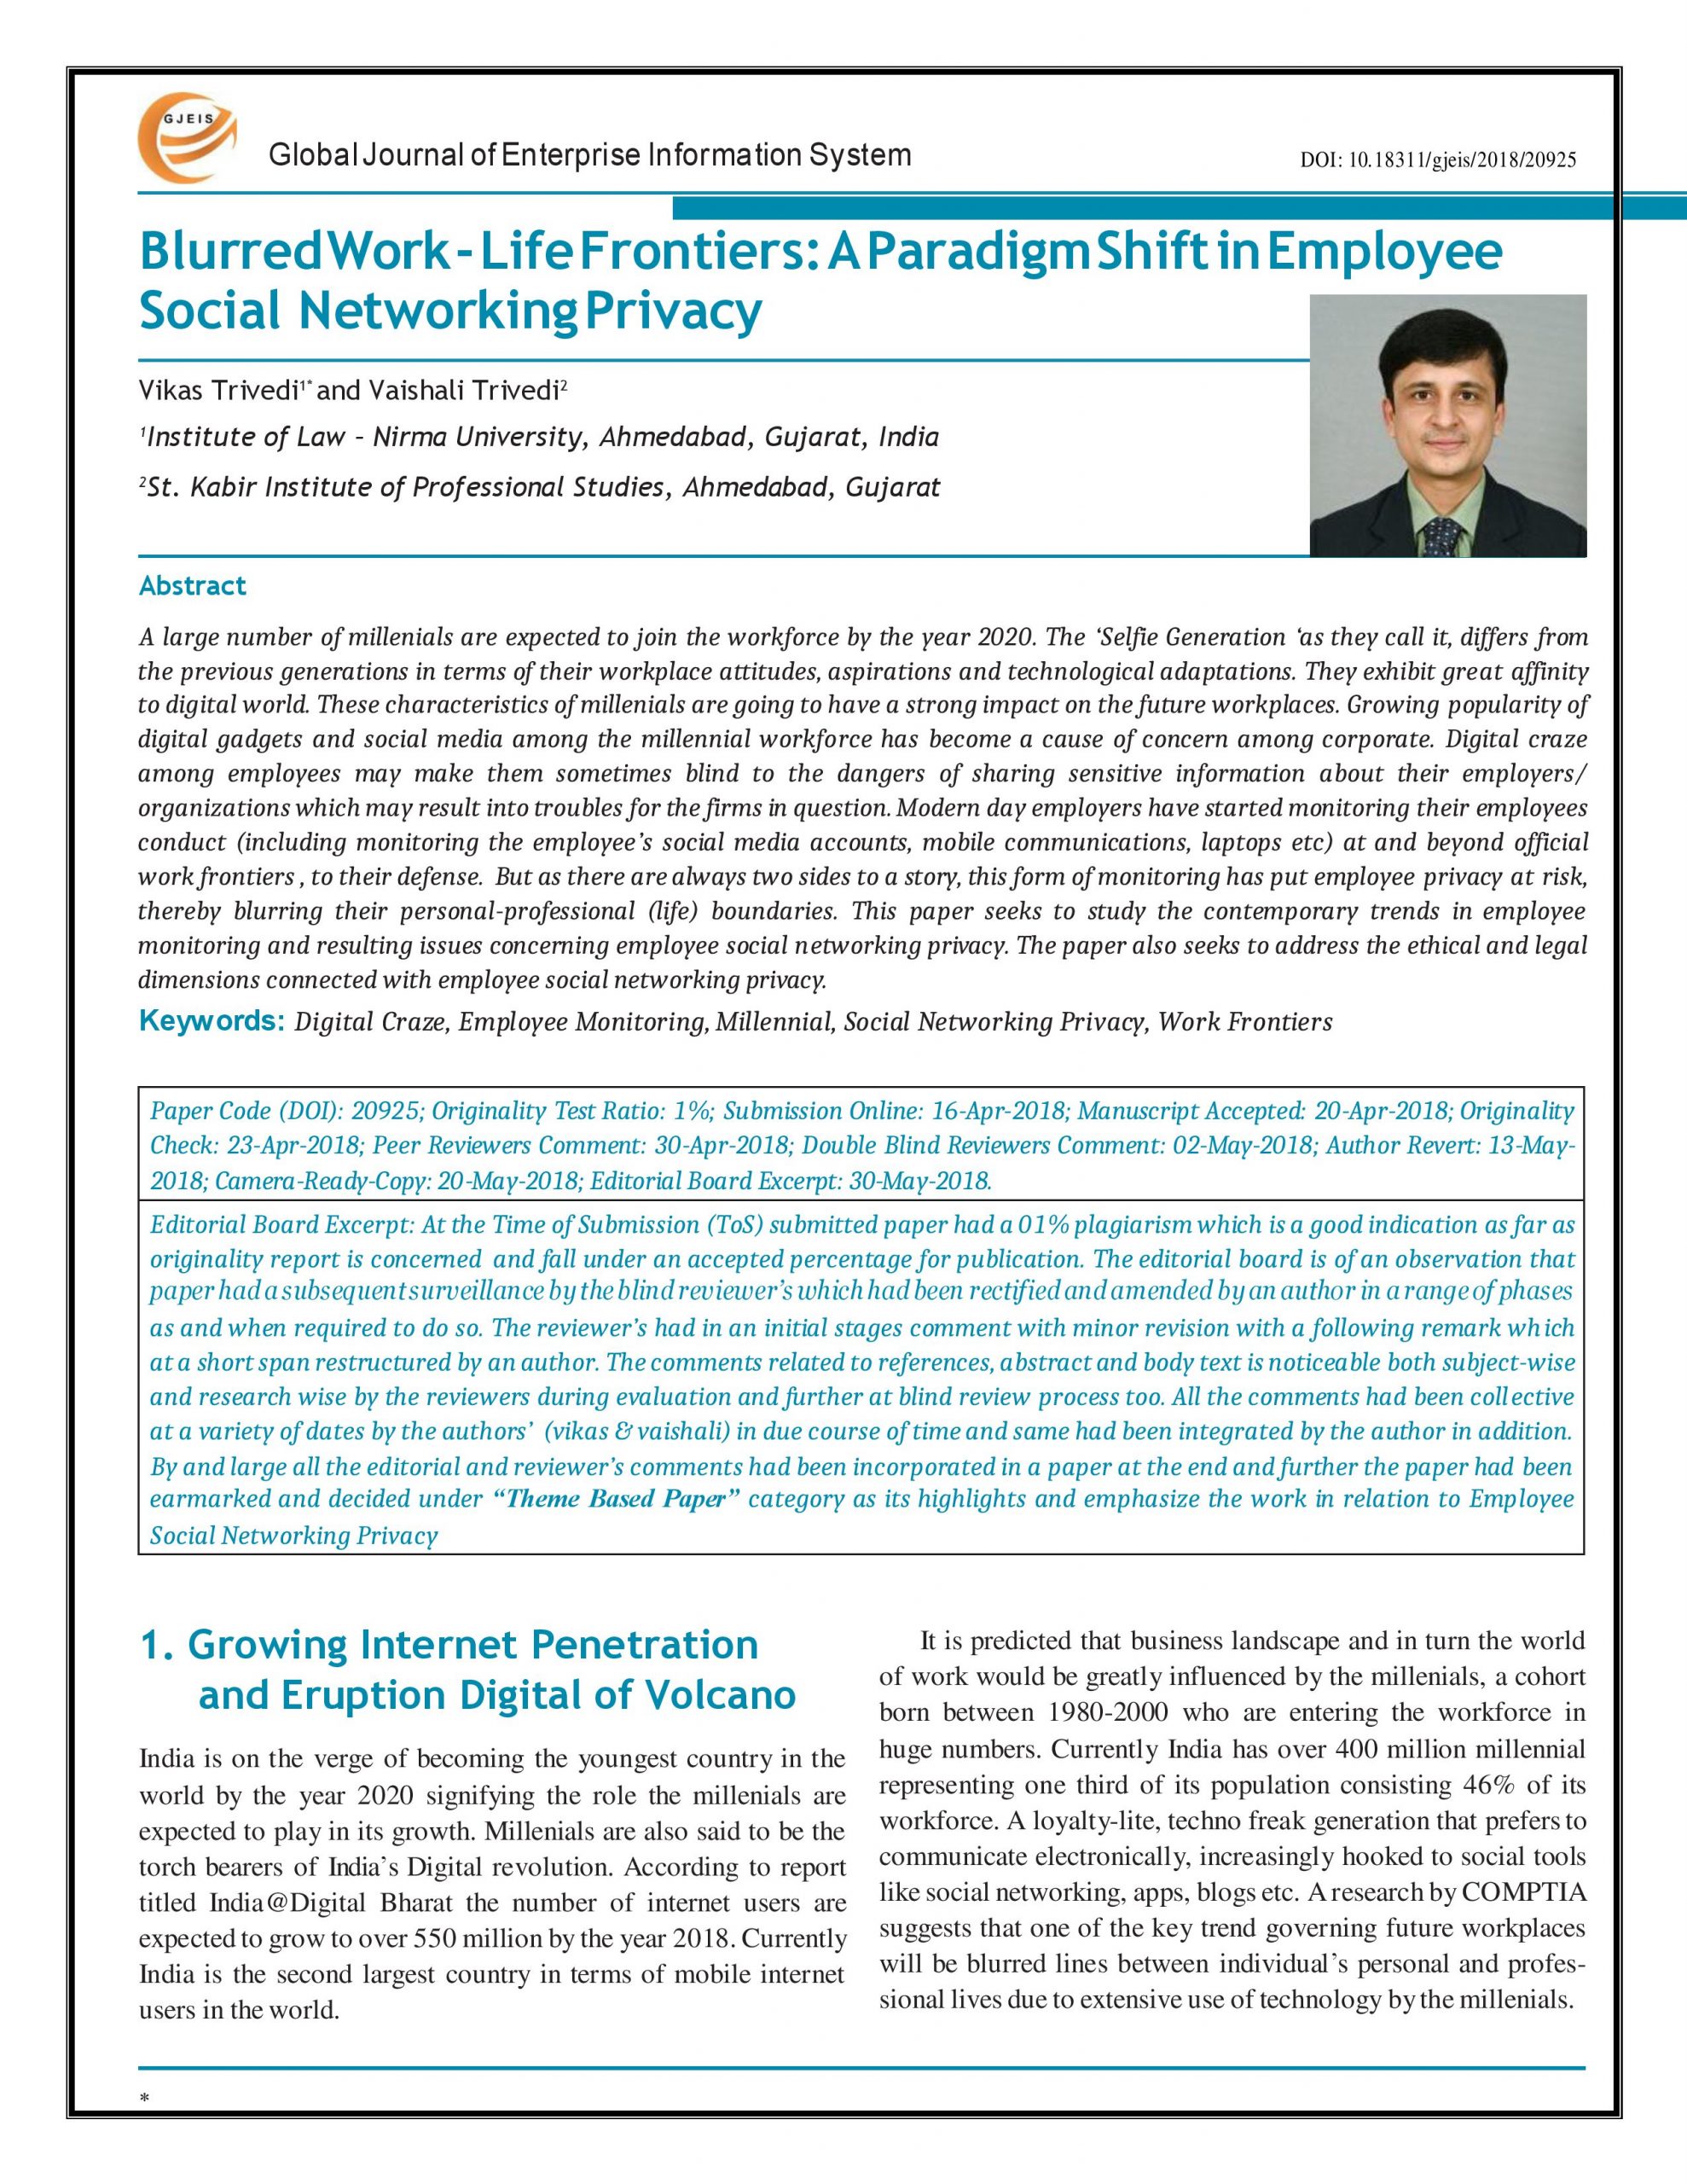 Blurred Work-Life Frontiers; A Paradigm Shift in Employee Social Networking Privacy